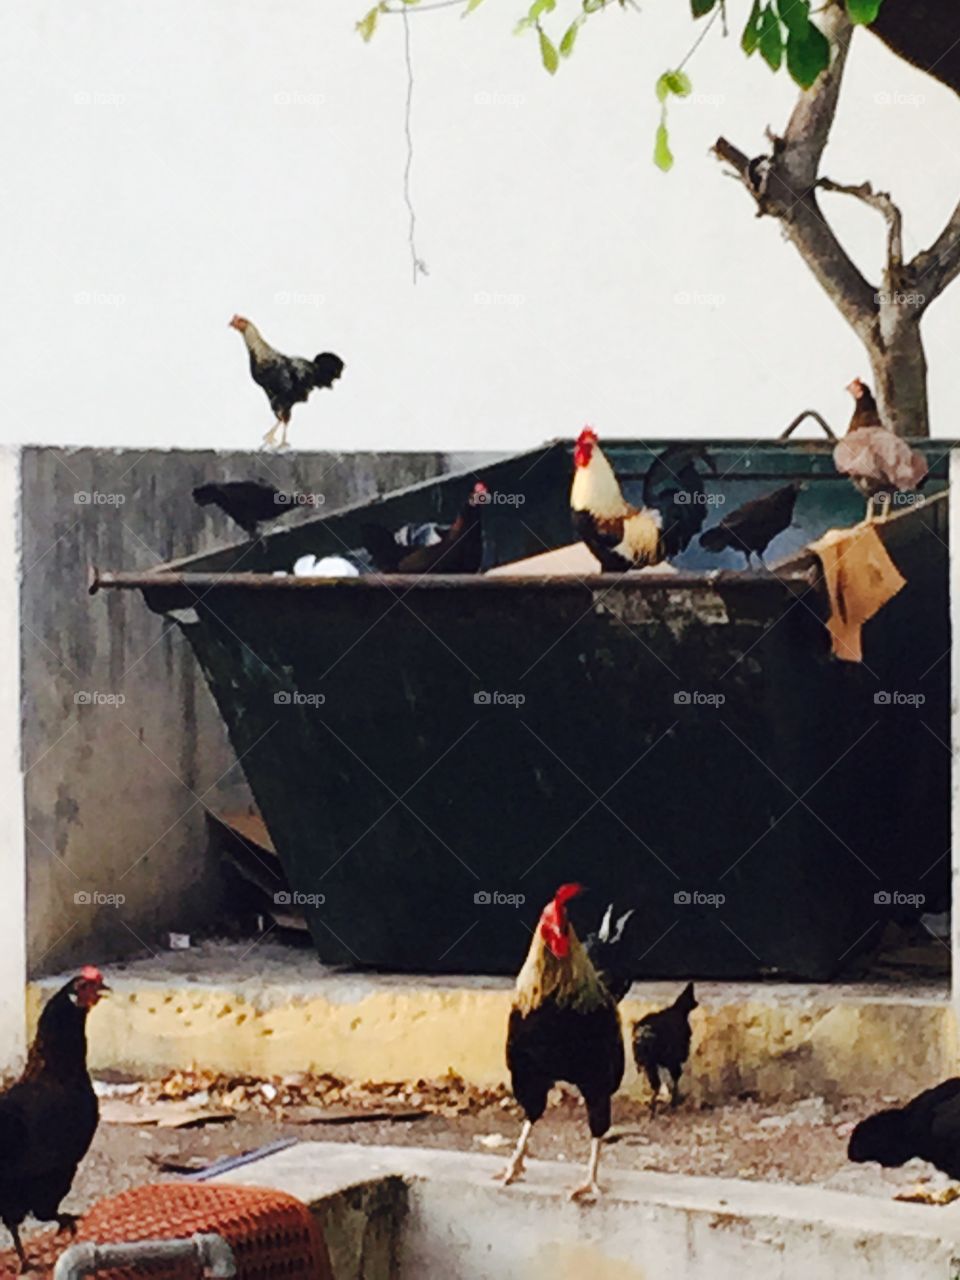 Dumpster roosters